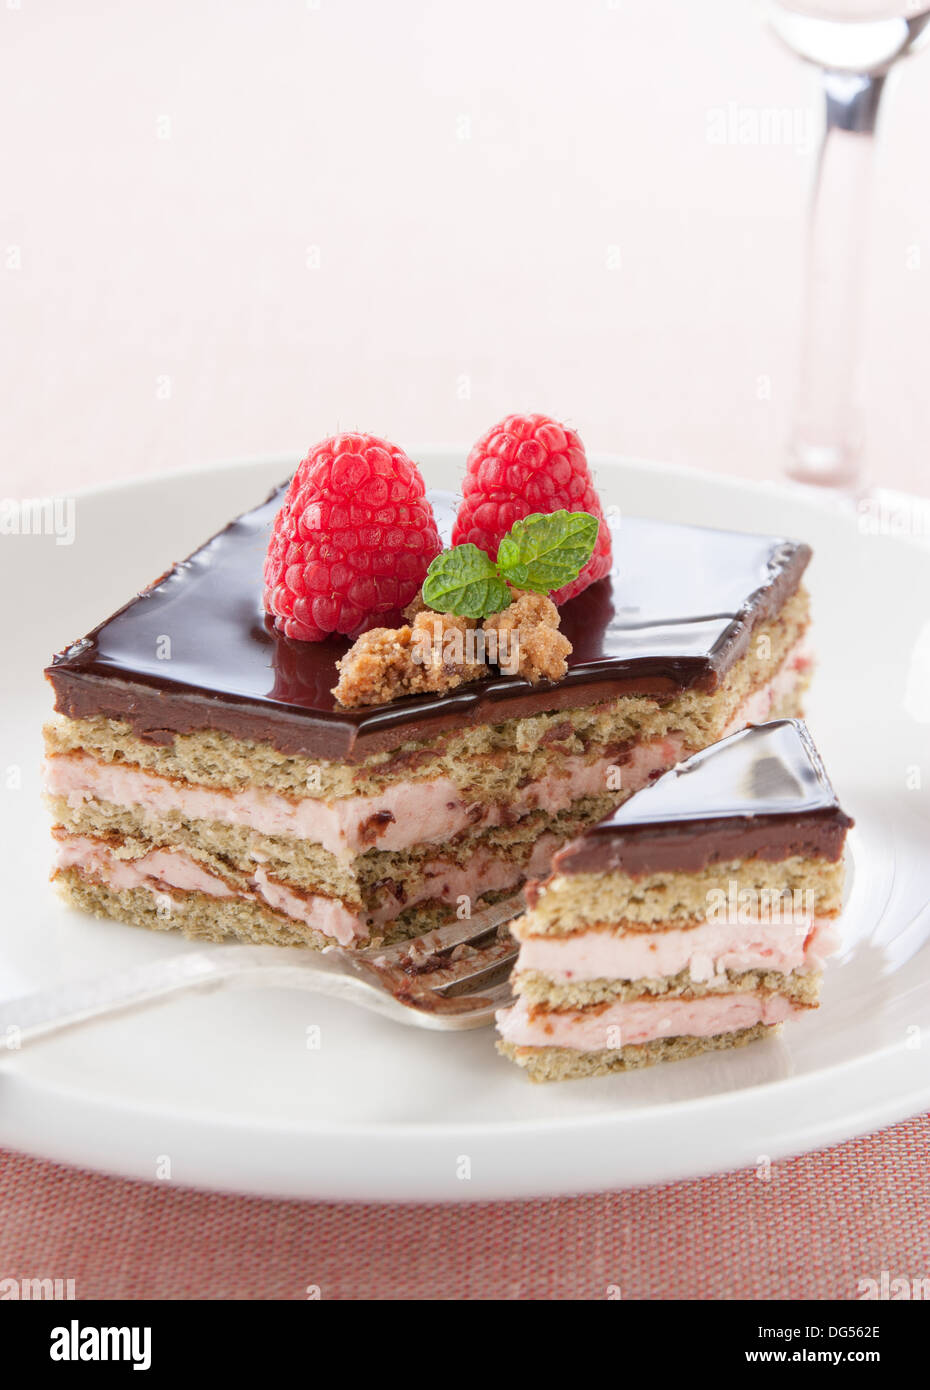 Portion of chocolate and strawberry cake on the table Stock Photo